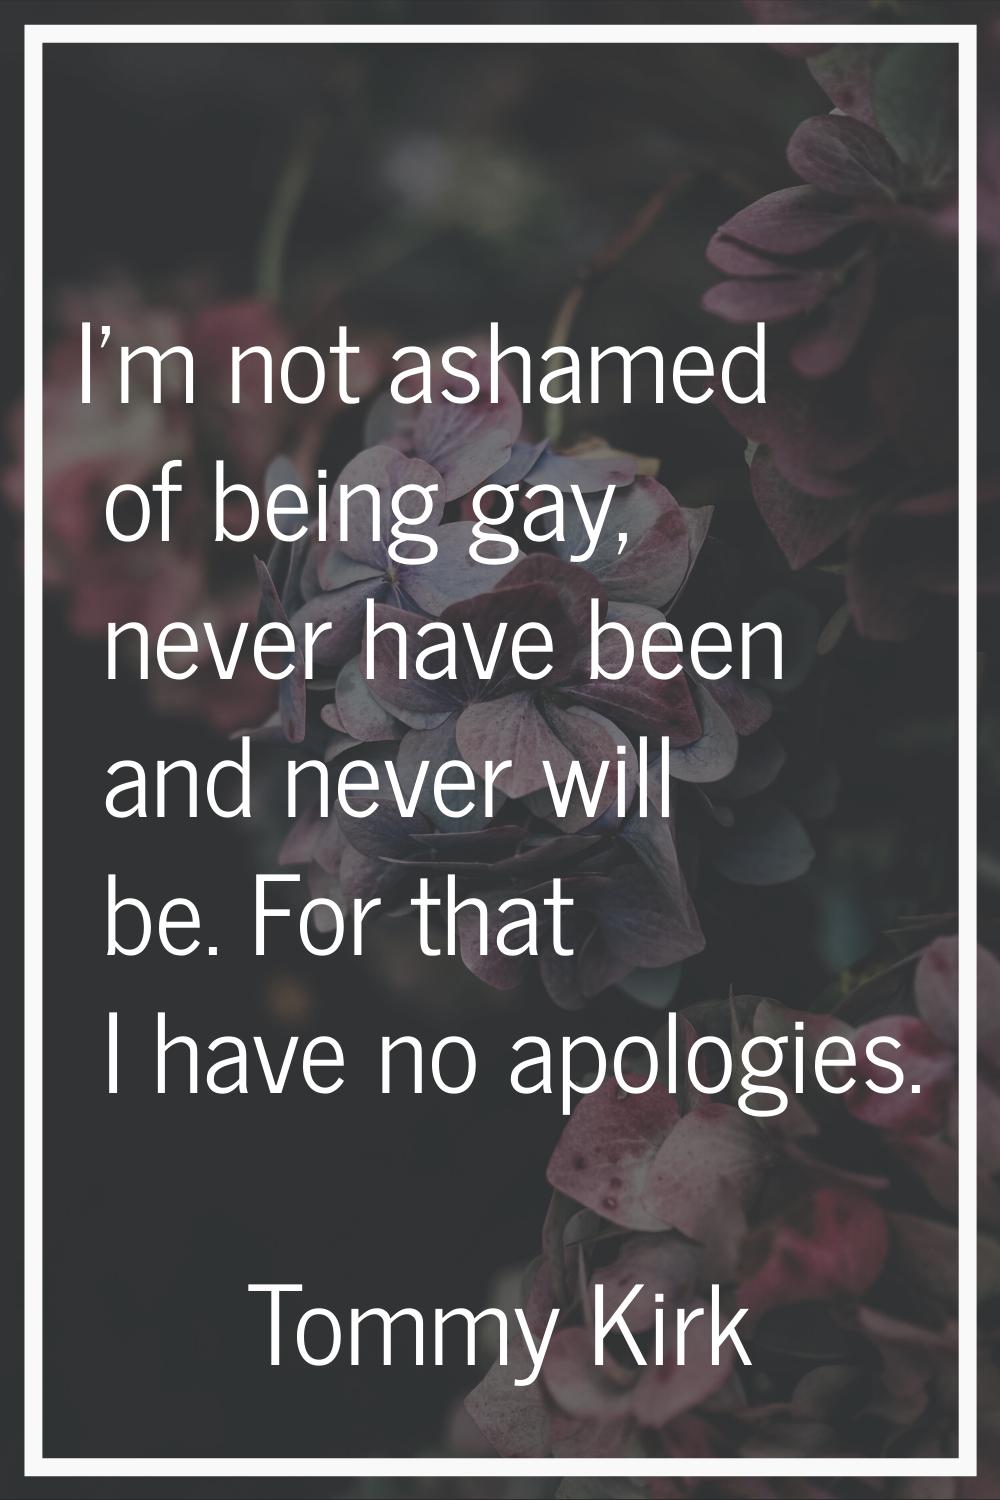 I'm not ashamed of being gay, never have been and never will be. For that I have no apologies.